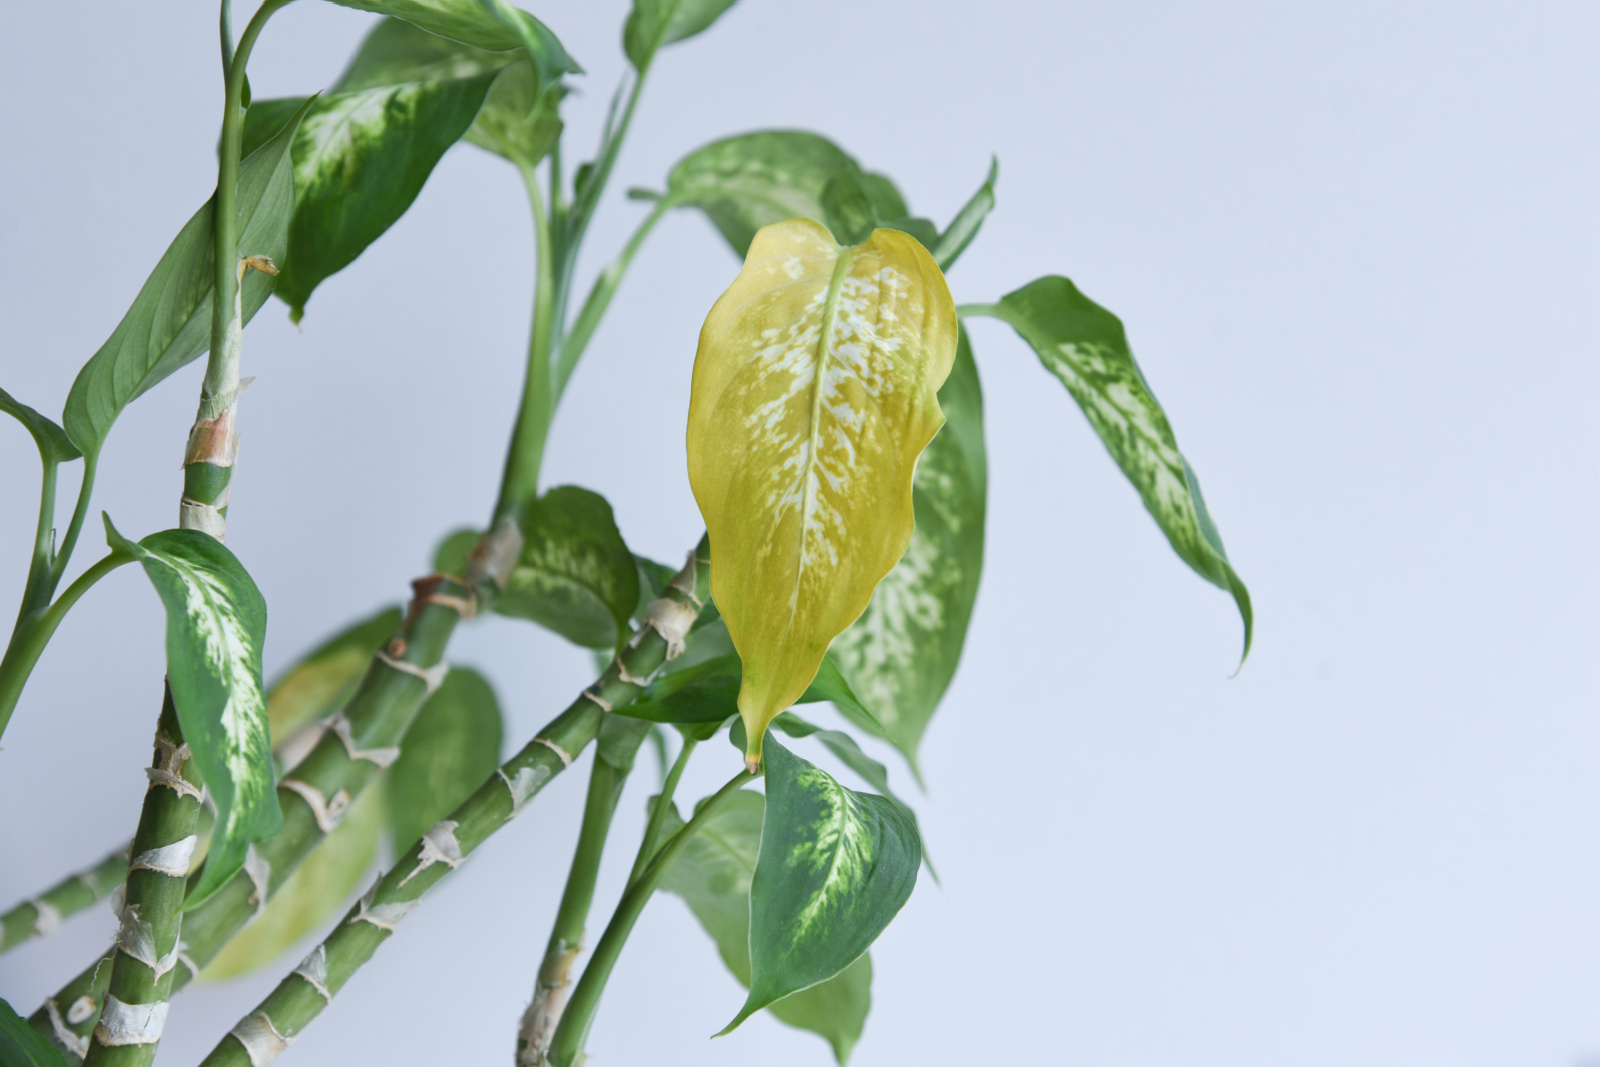 Dying house plant dieffembachia with yellow leaves.